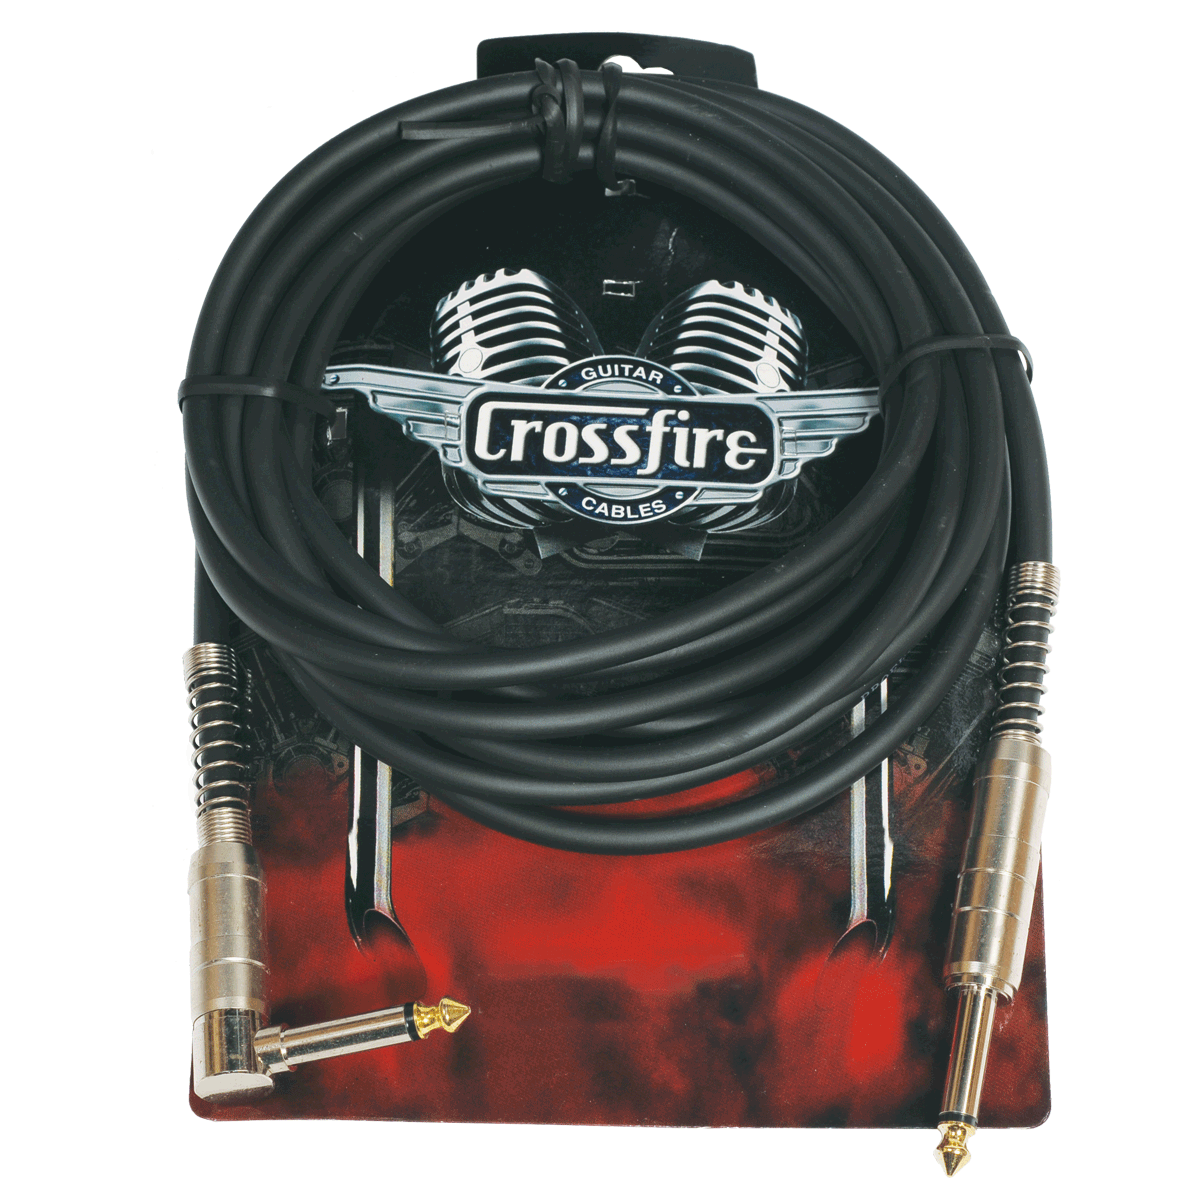 Crosssfire 10' / 3 Metre Instrument Cable with Straight-Angle Metal Jacks